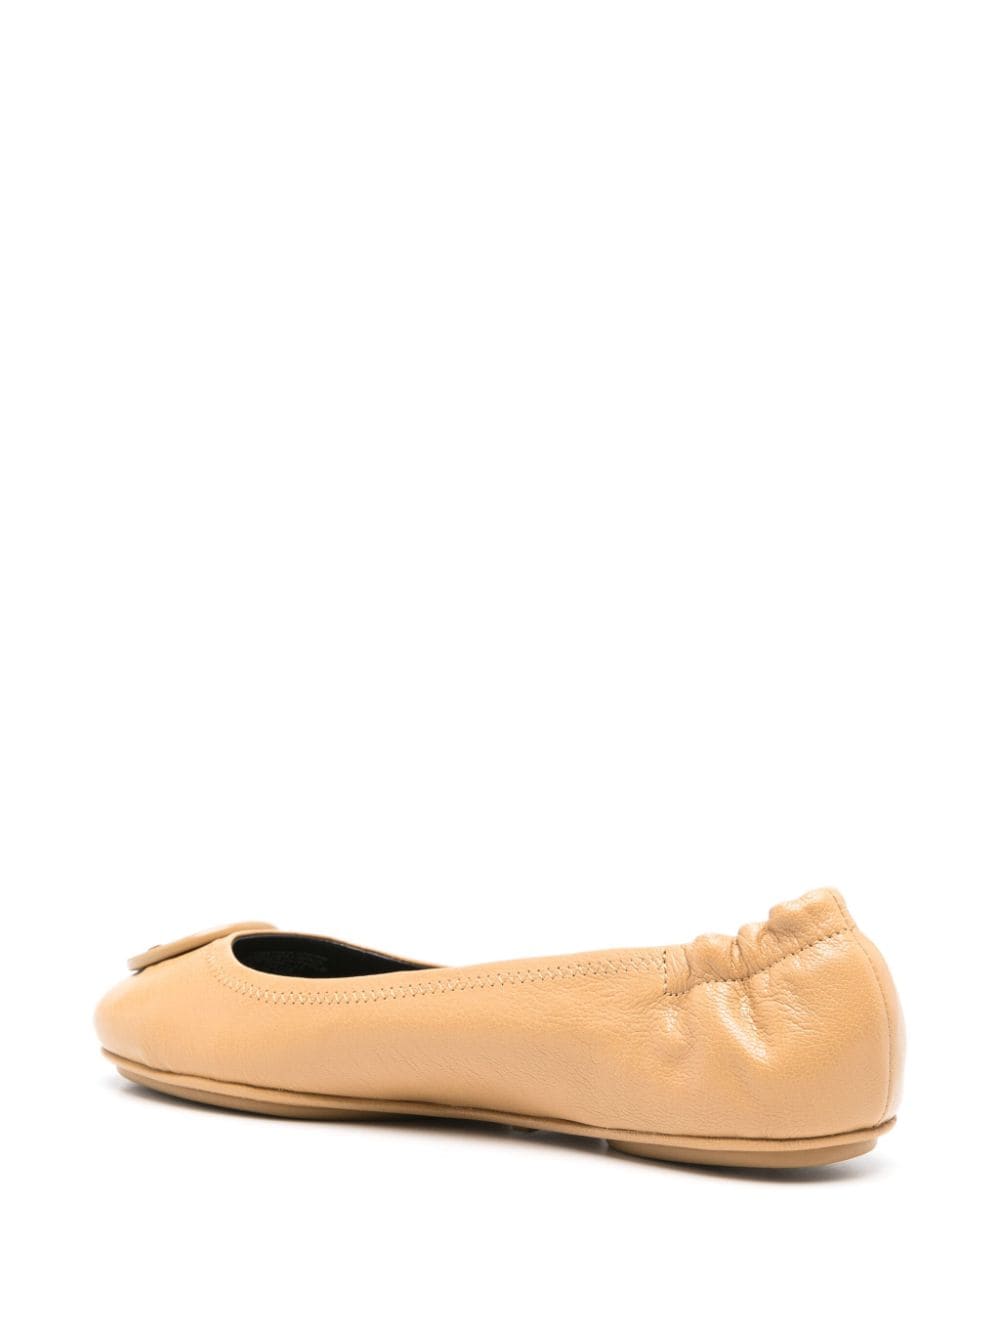 Shop Tory Burch Claire Leather Ballerina Shoes In Brown